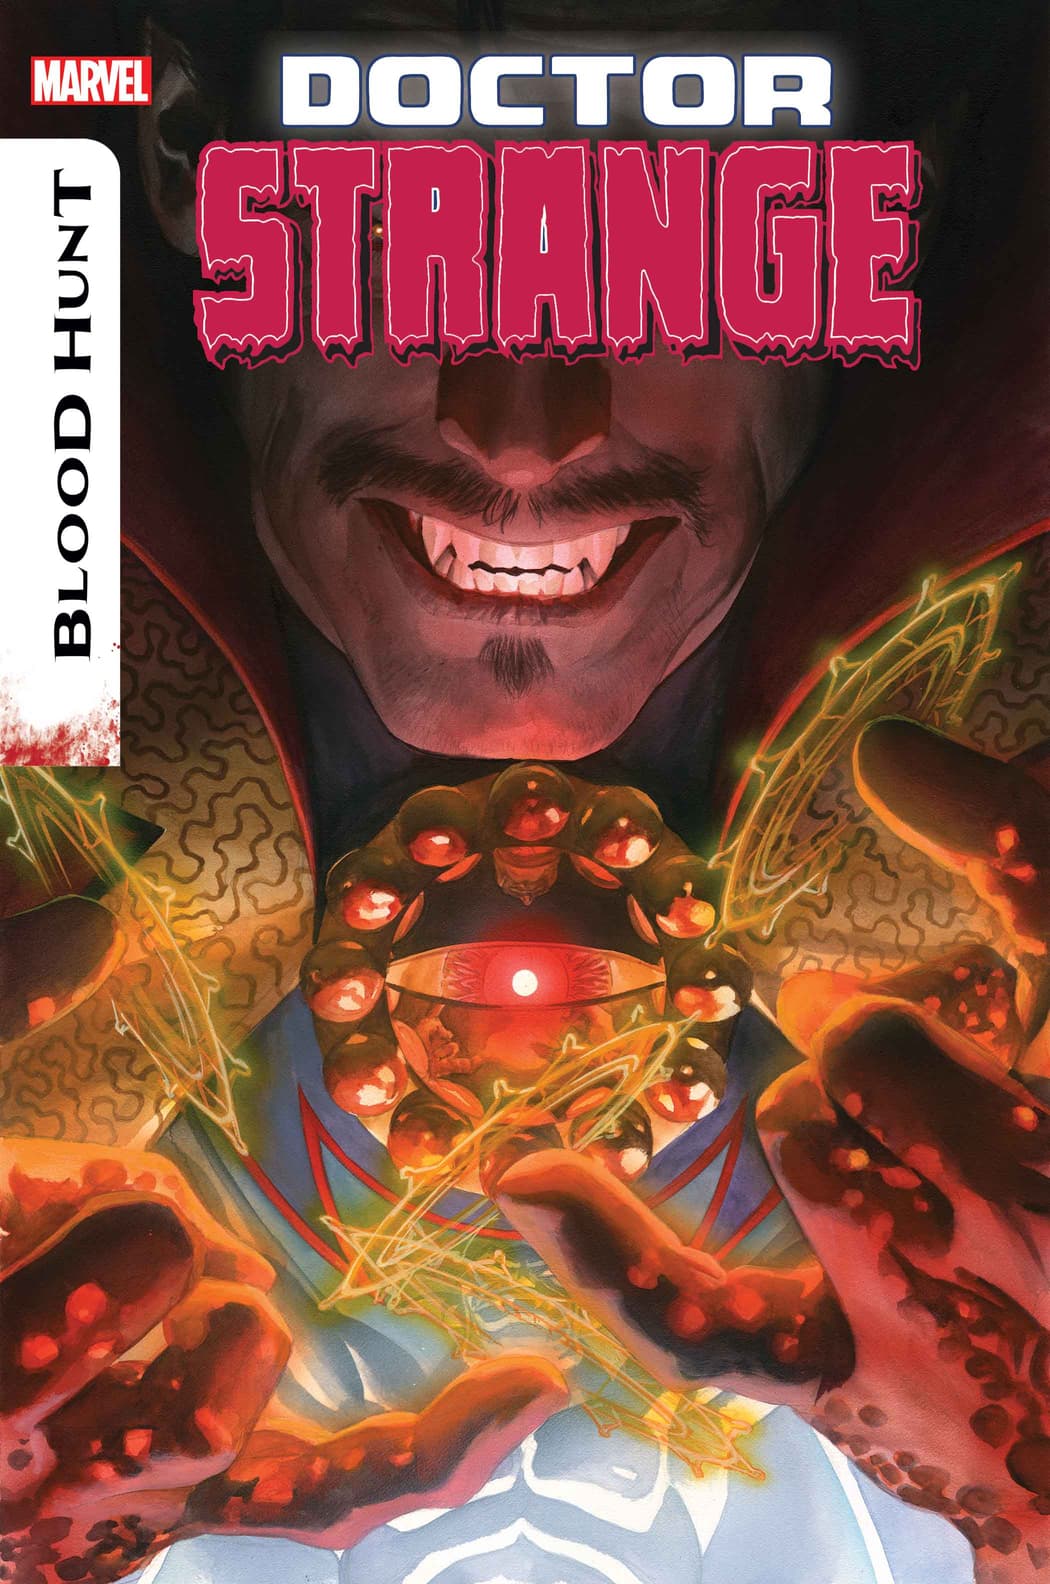 DOCTOR STRANGE #15 cover by Alex Ross